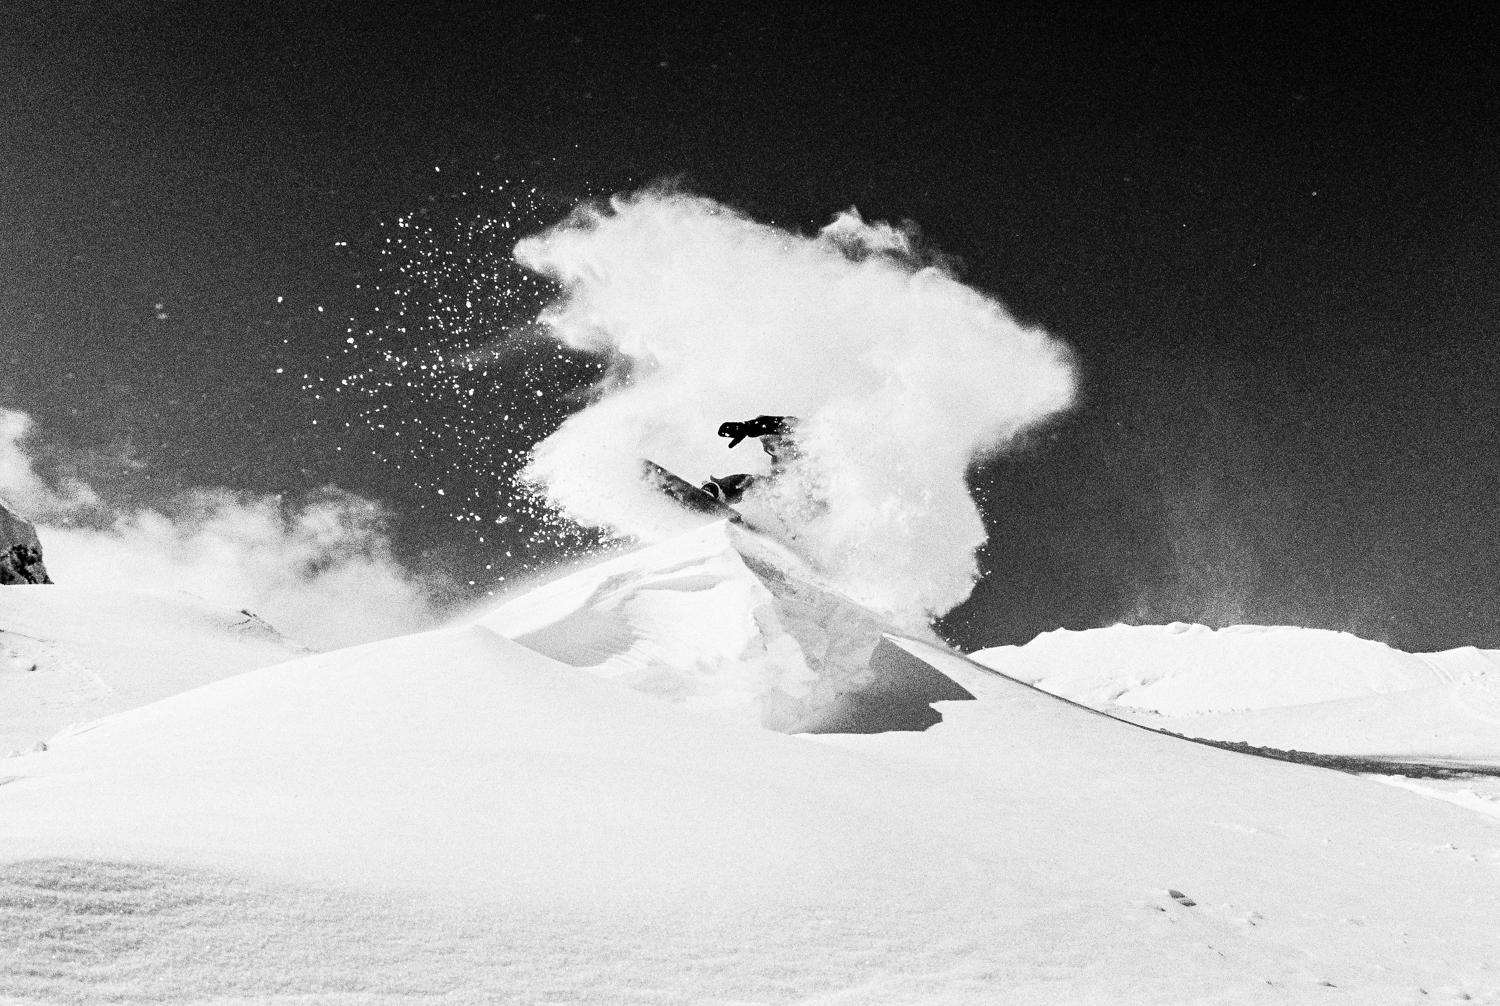 Carlos Blanchard Black and White Photograph - Snowdance - Mountain Snowboarding Black & White Art Photography